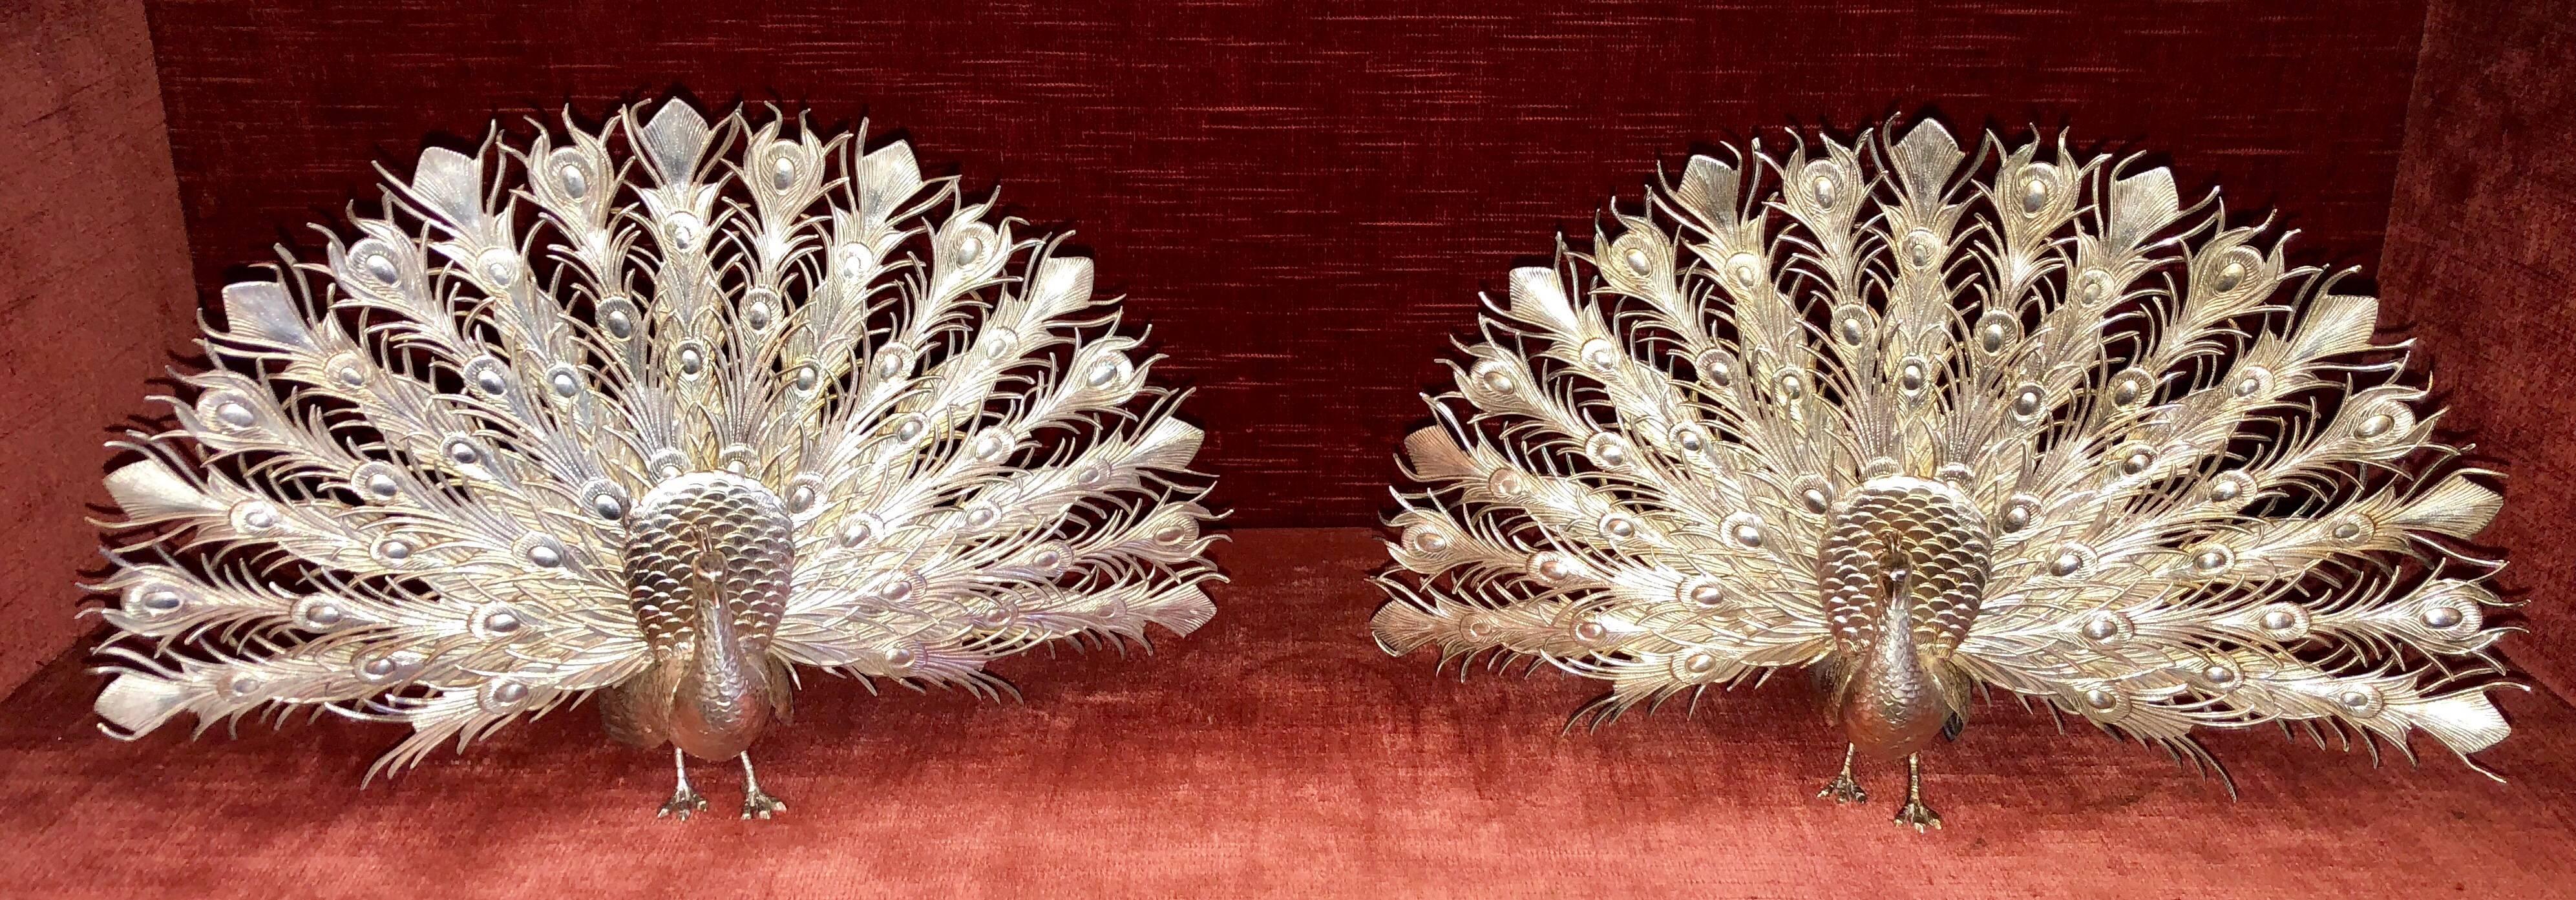 Pair of antique English sterling silver peacocks, circa 1920-1930.